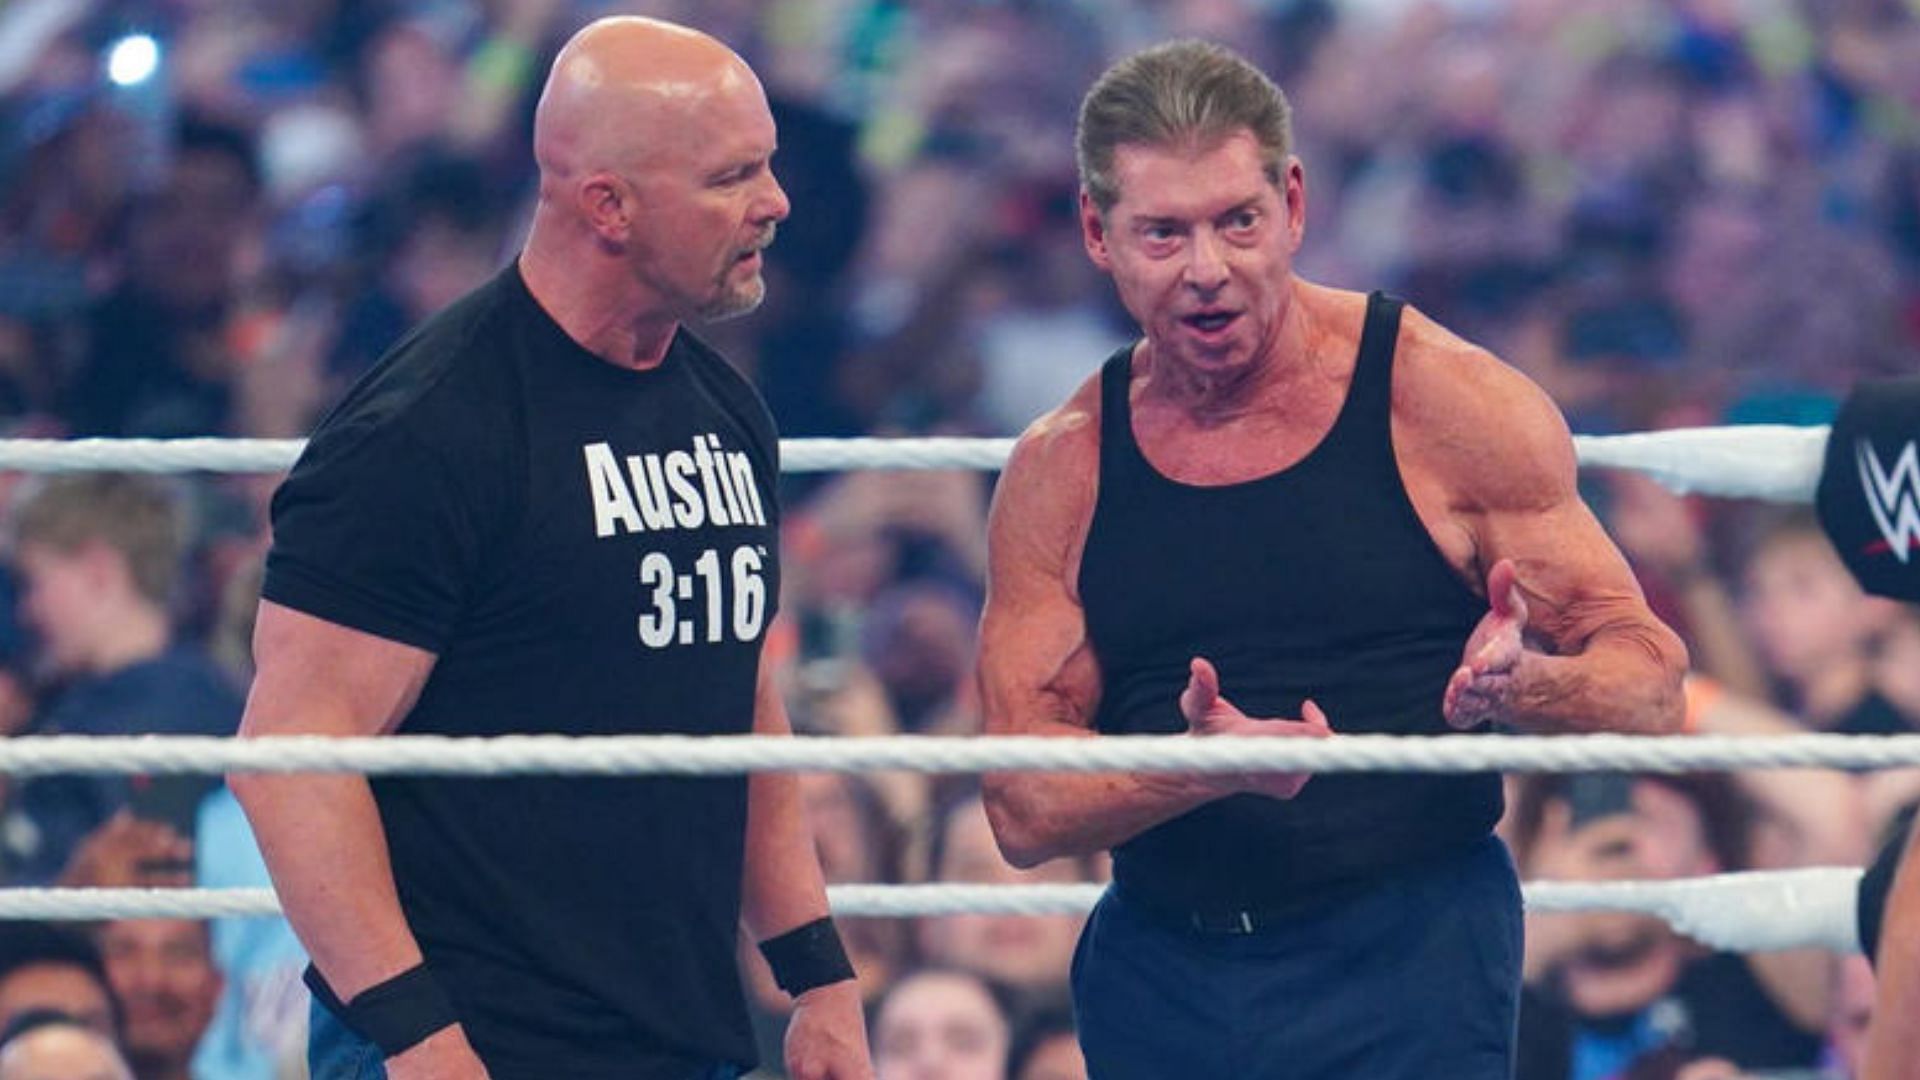 Steve Austin (left) and Vince McMahon (right) at WrestleMania 38.